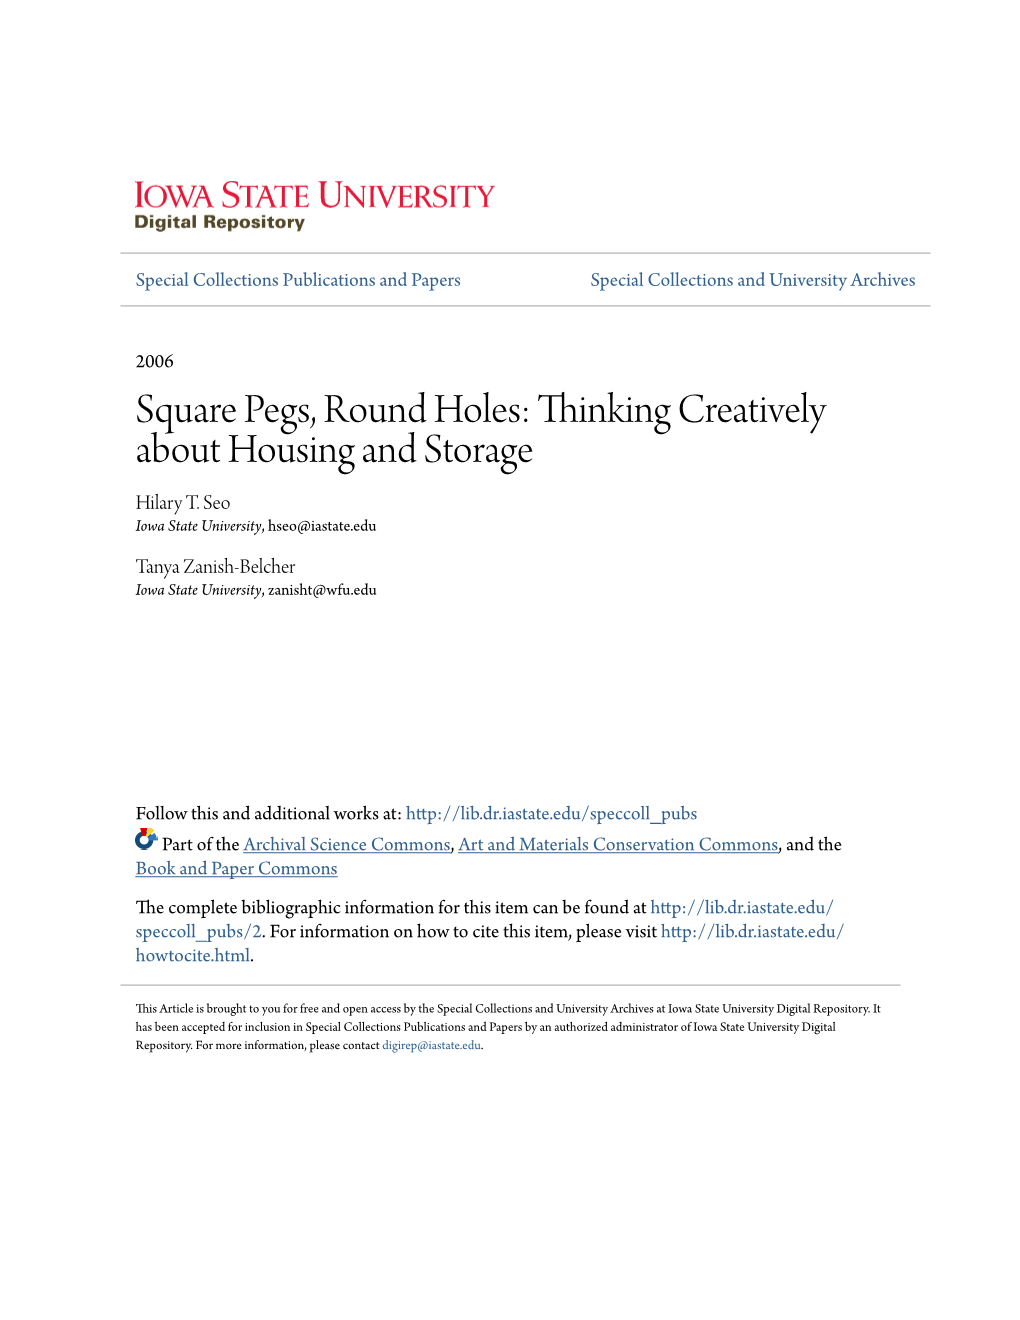 Square Pegs, Round Holes: Thinking Creatively About Housing and Storage Hilary T